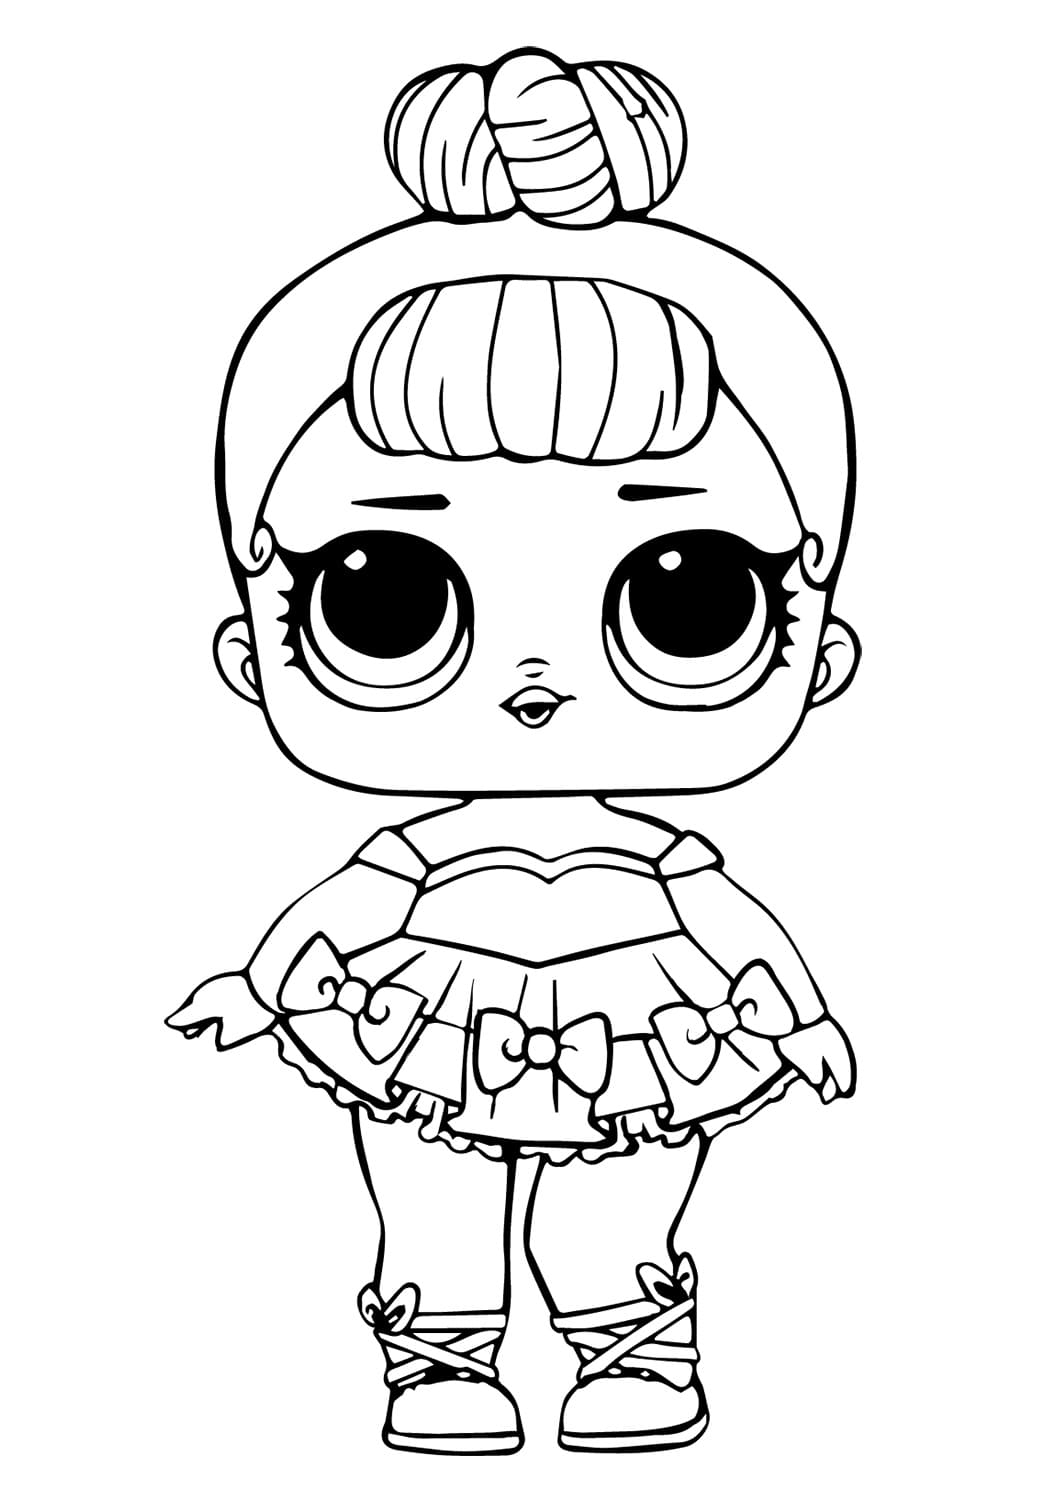 Miss Baby Glitter Lol Surprise Doll coloring page